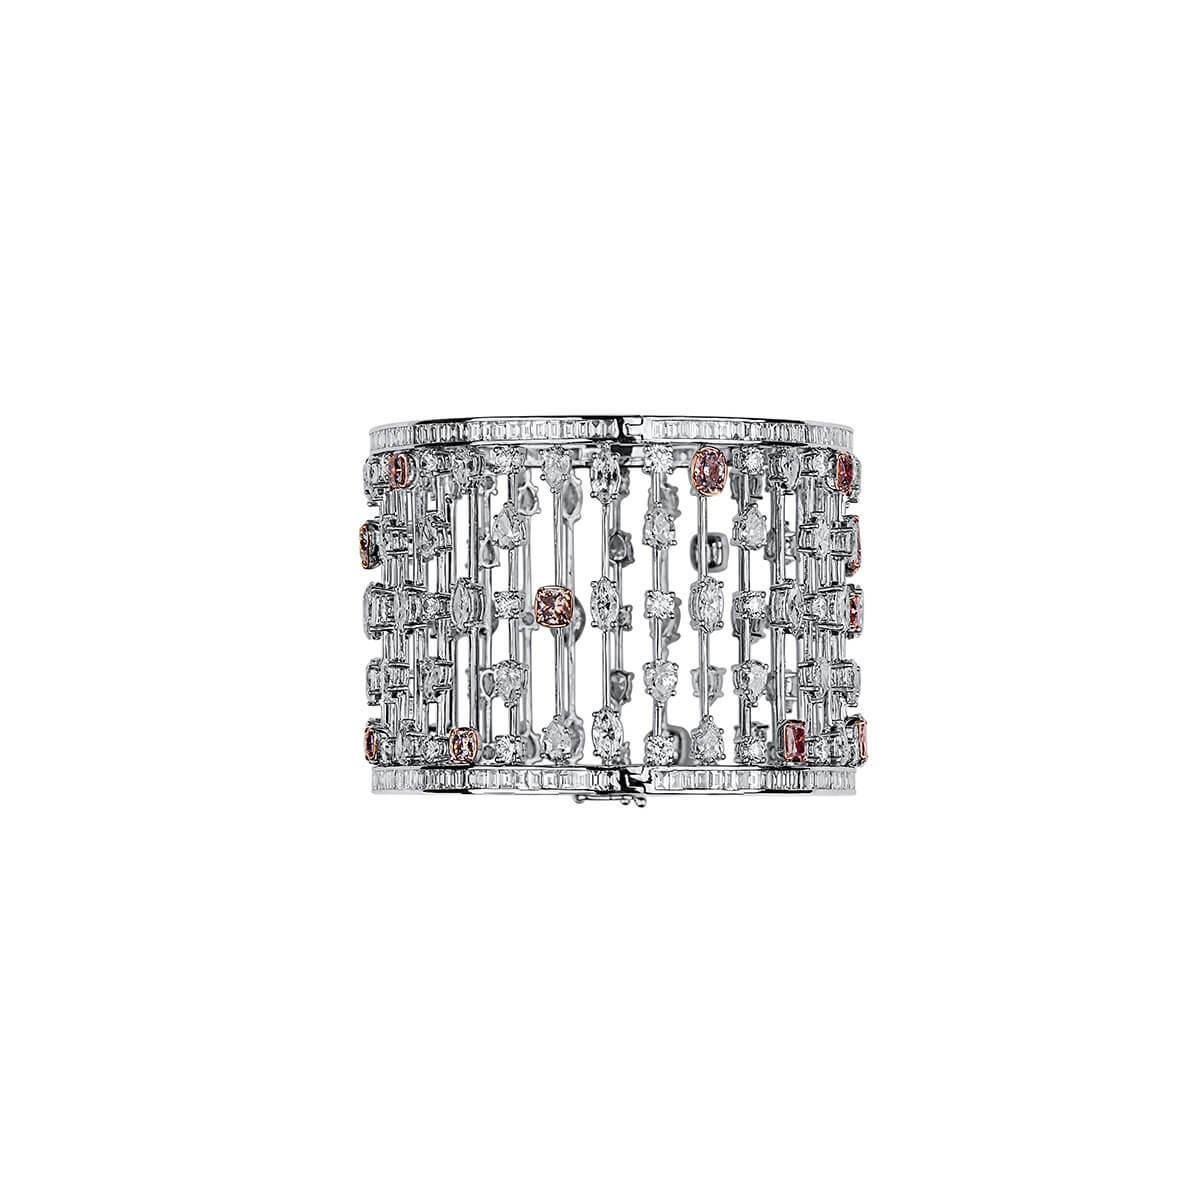 This incrediblie piece consits of the perfect mixture of natural white and pink diamonds. Together making up a total of 31.60 Carats. Sophisticated yet bold, this is GIA certified and has been expertly crafted using 18 Karat white gold. 

The color